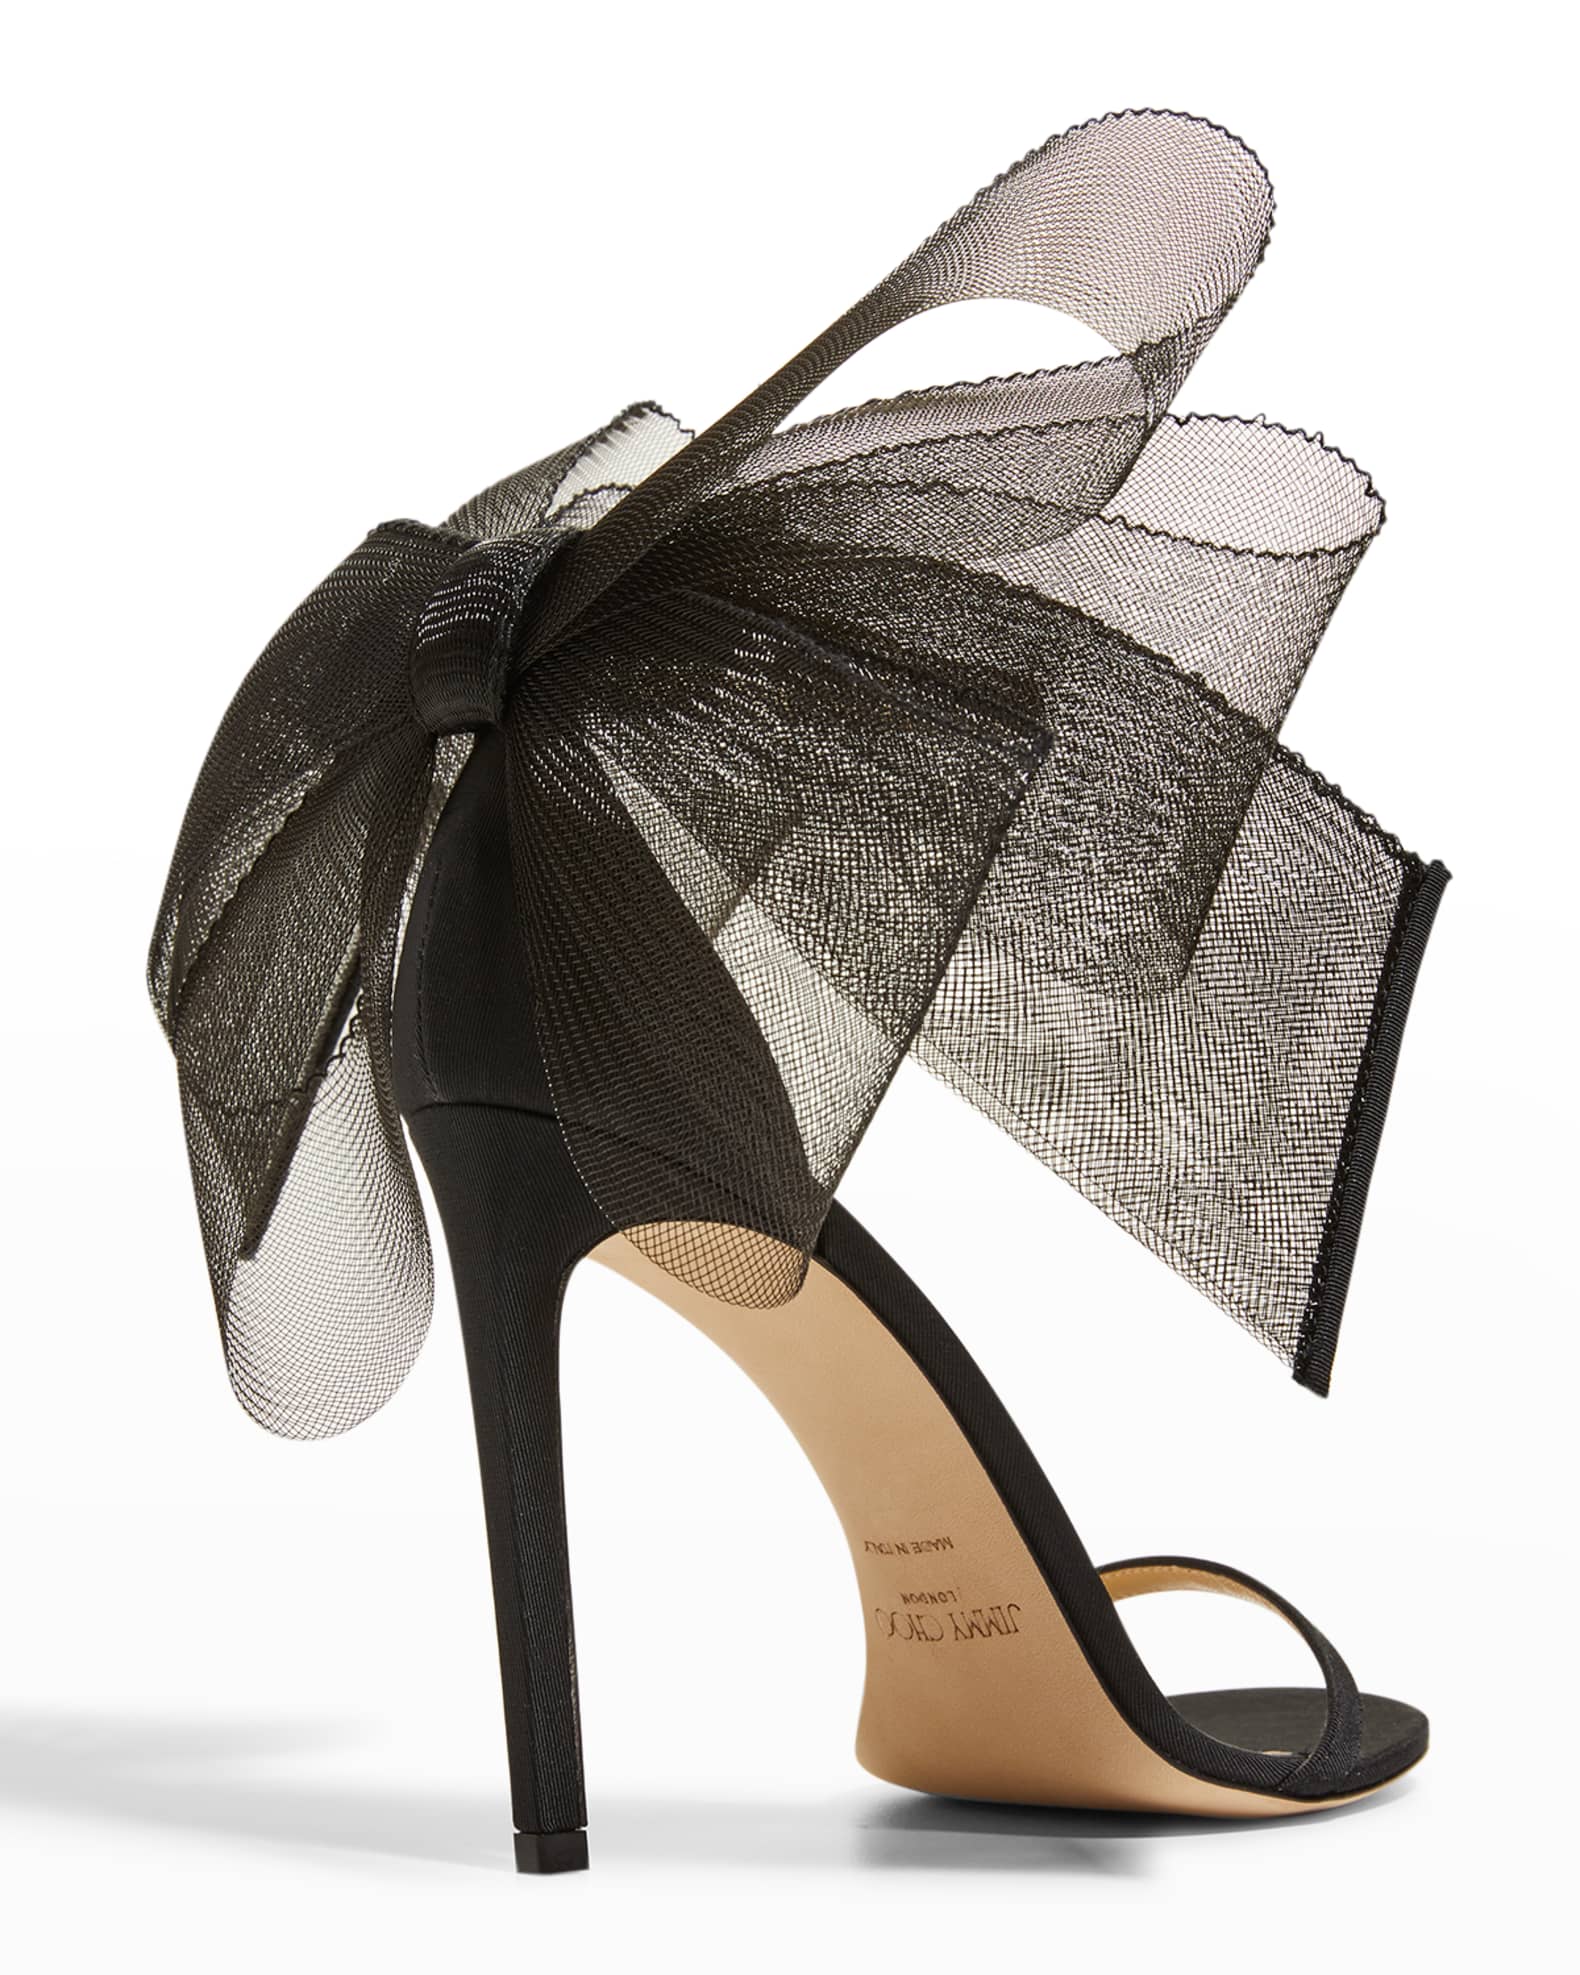 Jimmy Choo Aveline Tulle Bow Ankle-Strap Sandals | Neiman Marcus